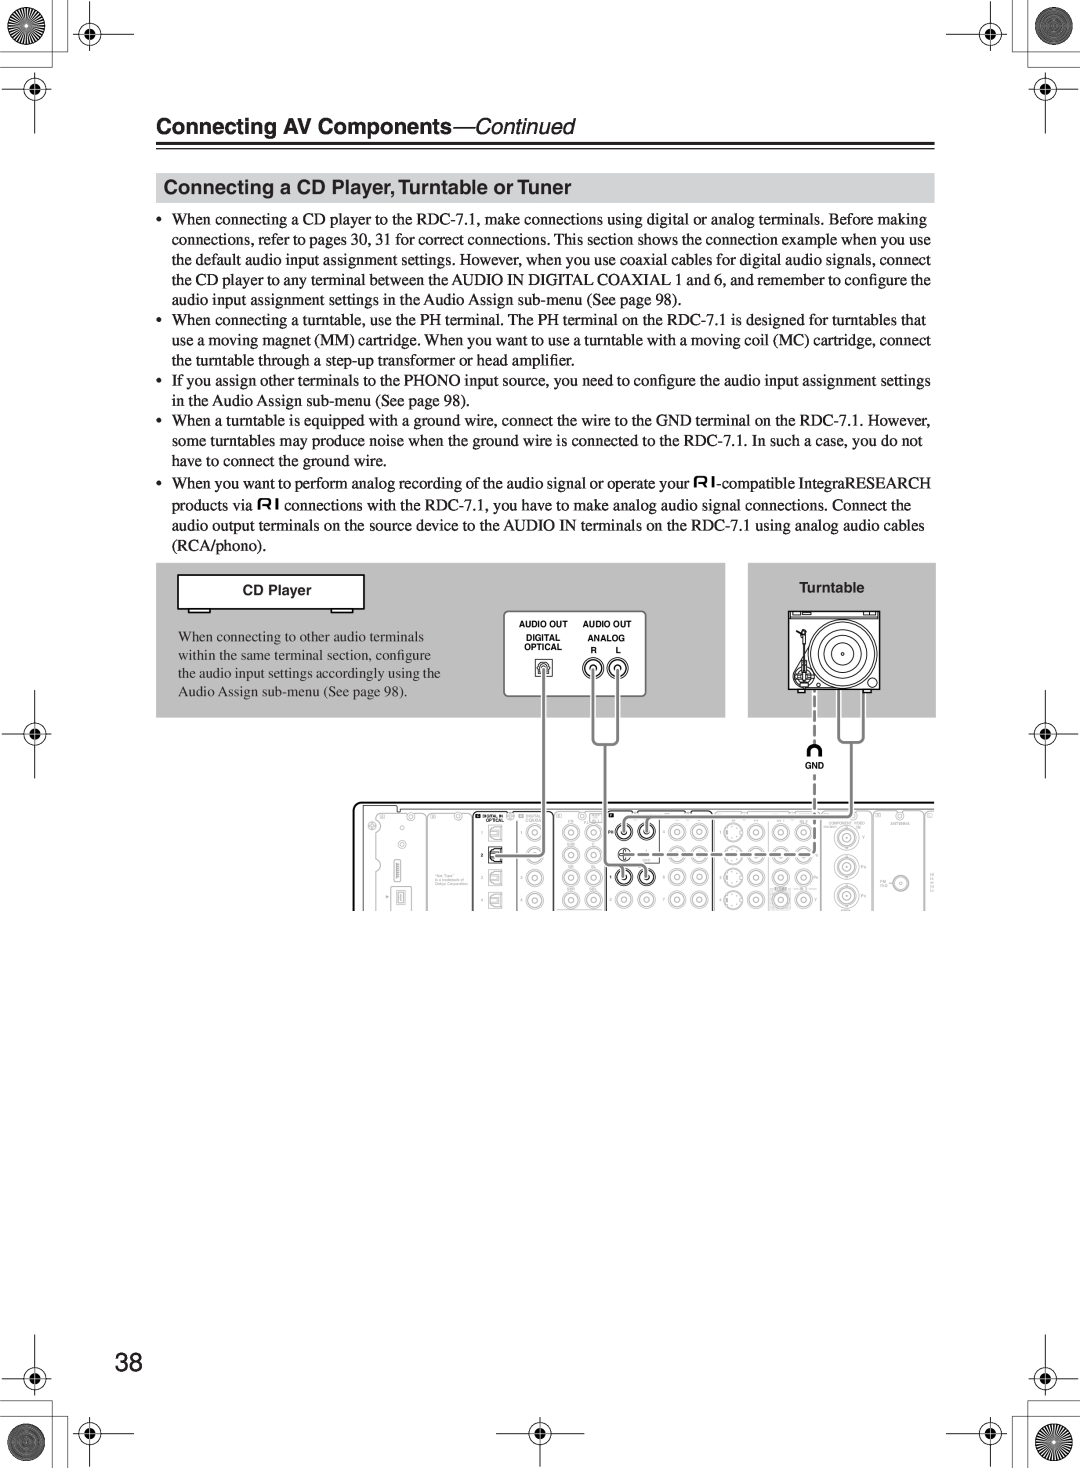 Integra RDC-7.1 instruction manual Connecting a CD Player, Turntable or Tuner, Connecting AV Components—Continued 